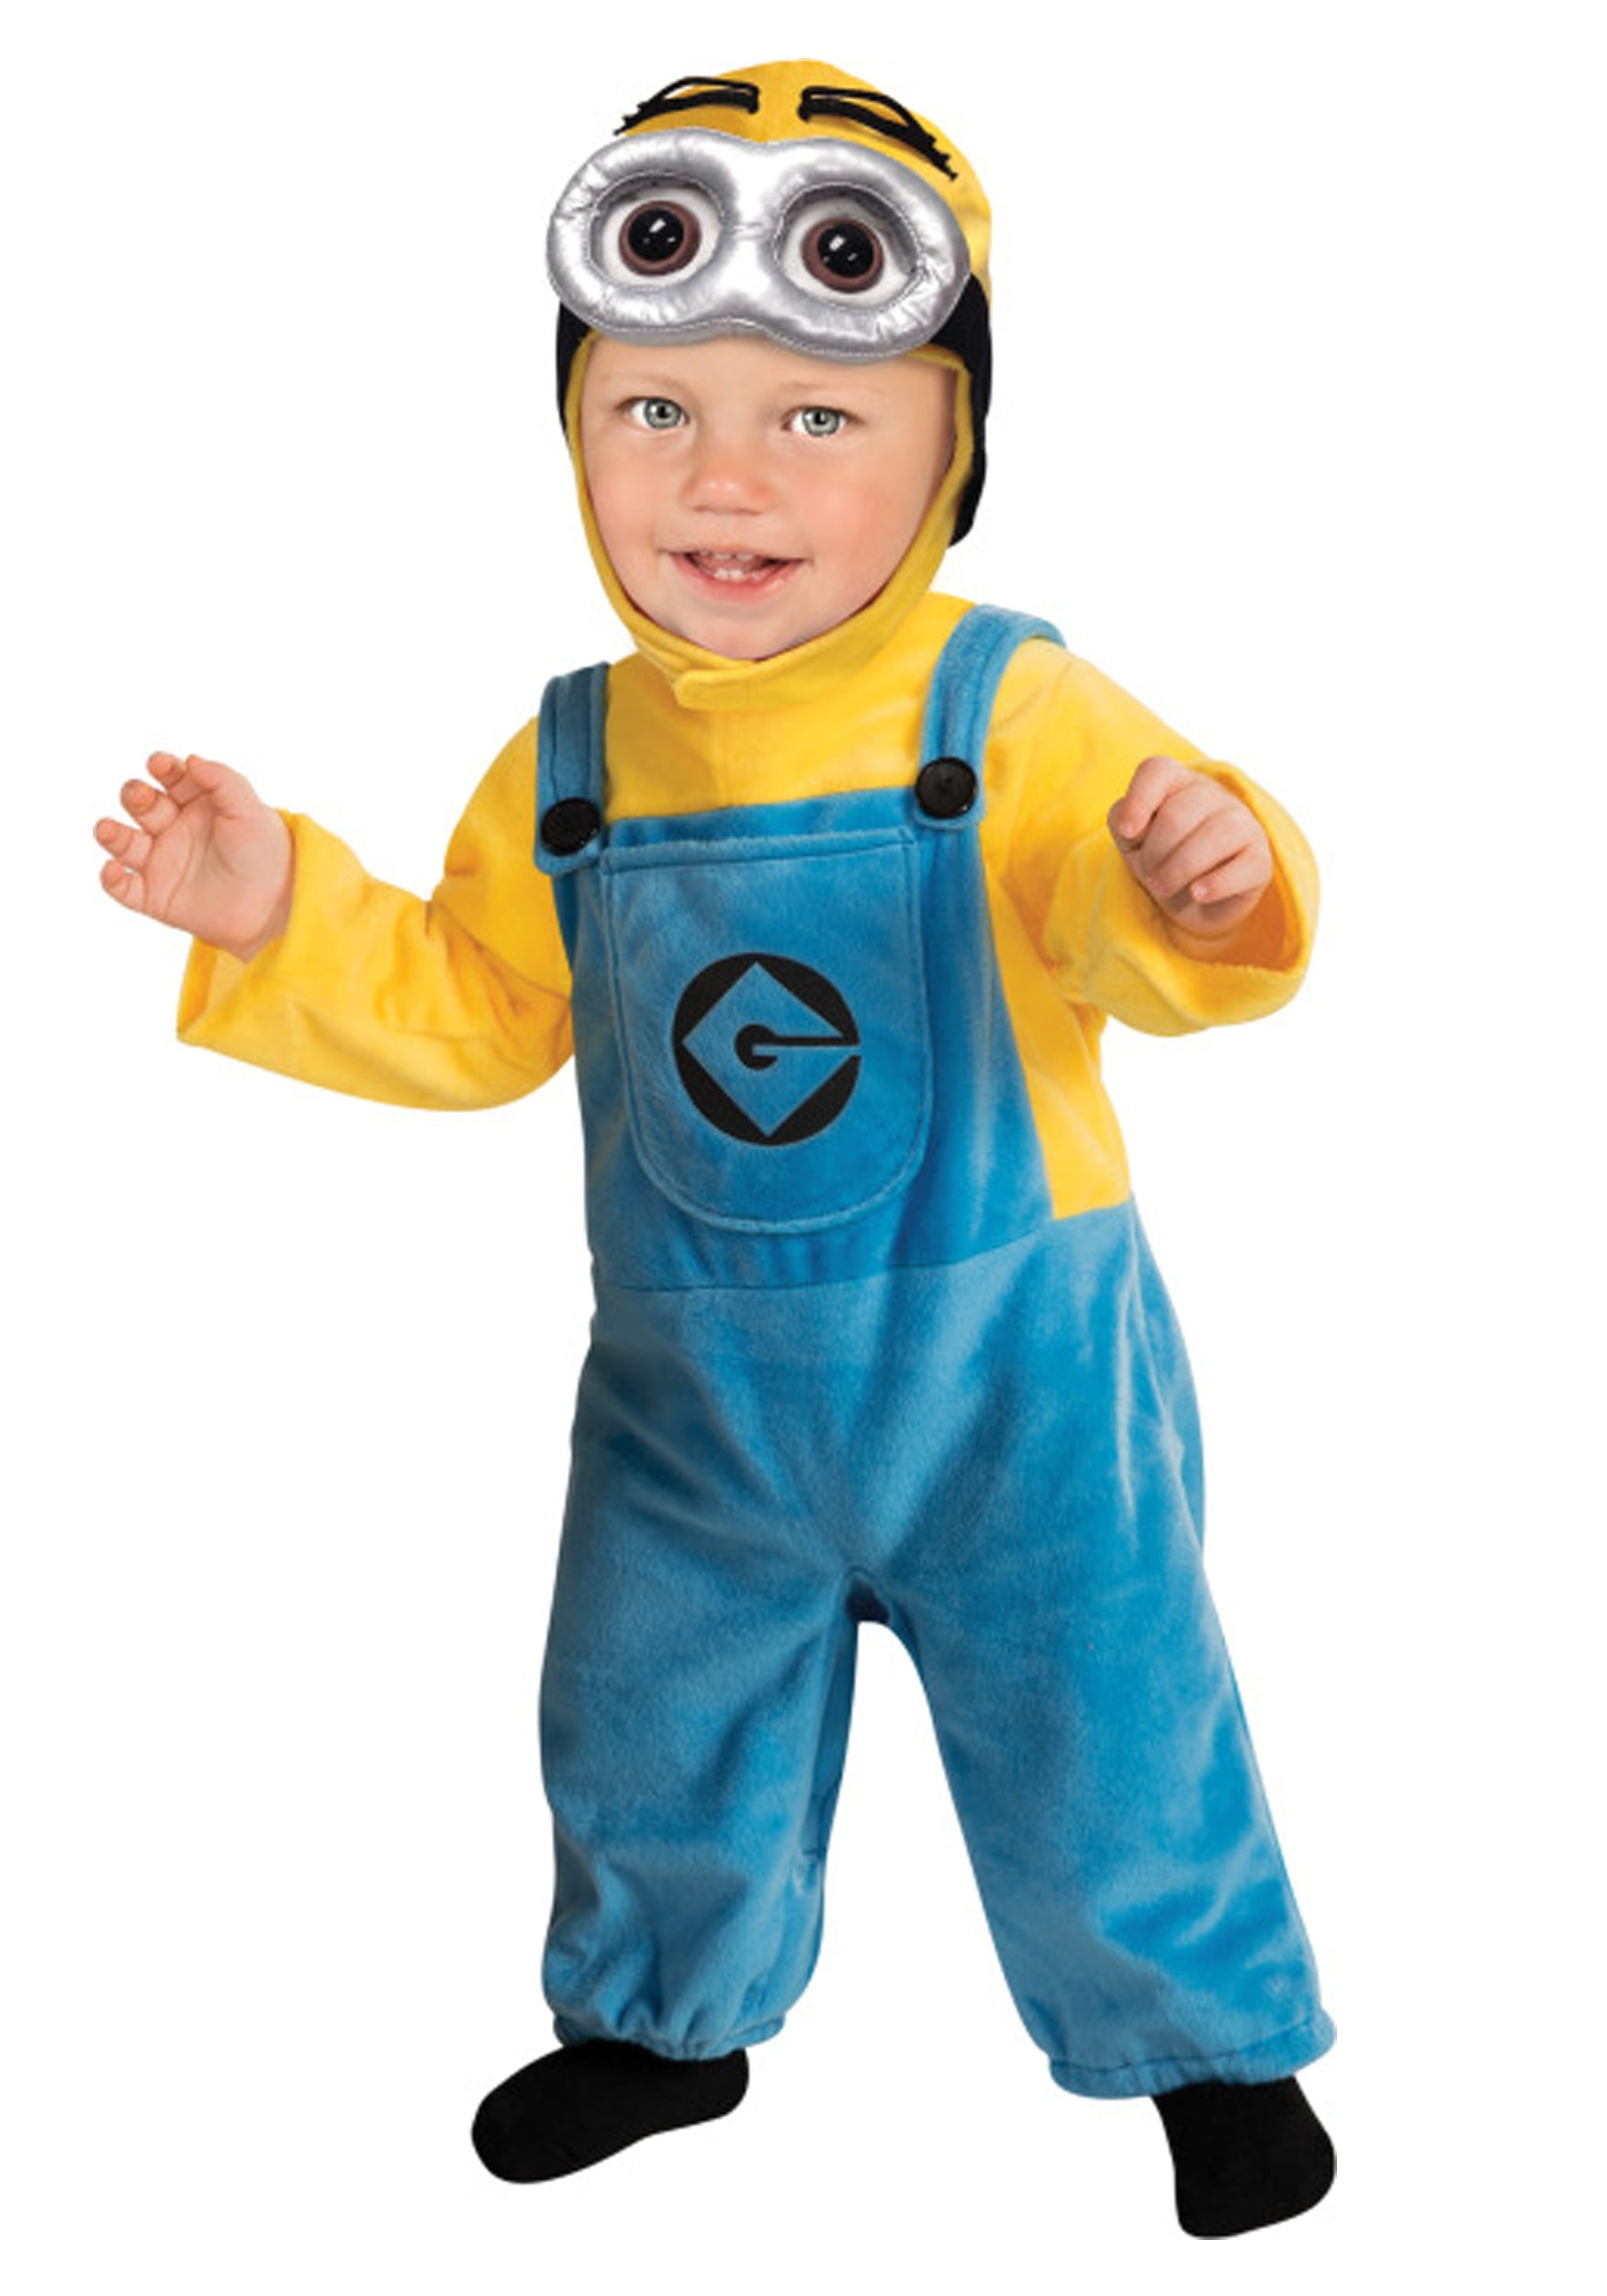 TODDLER GIRLS DELUXE DESPICABLE ME AGNES MINION FANCY DRESS COSTUME OUTFIT 